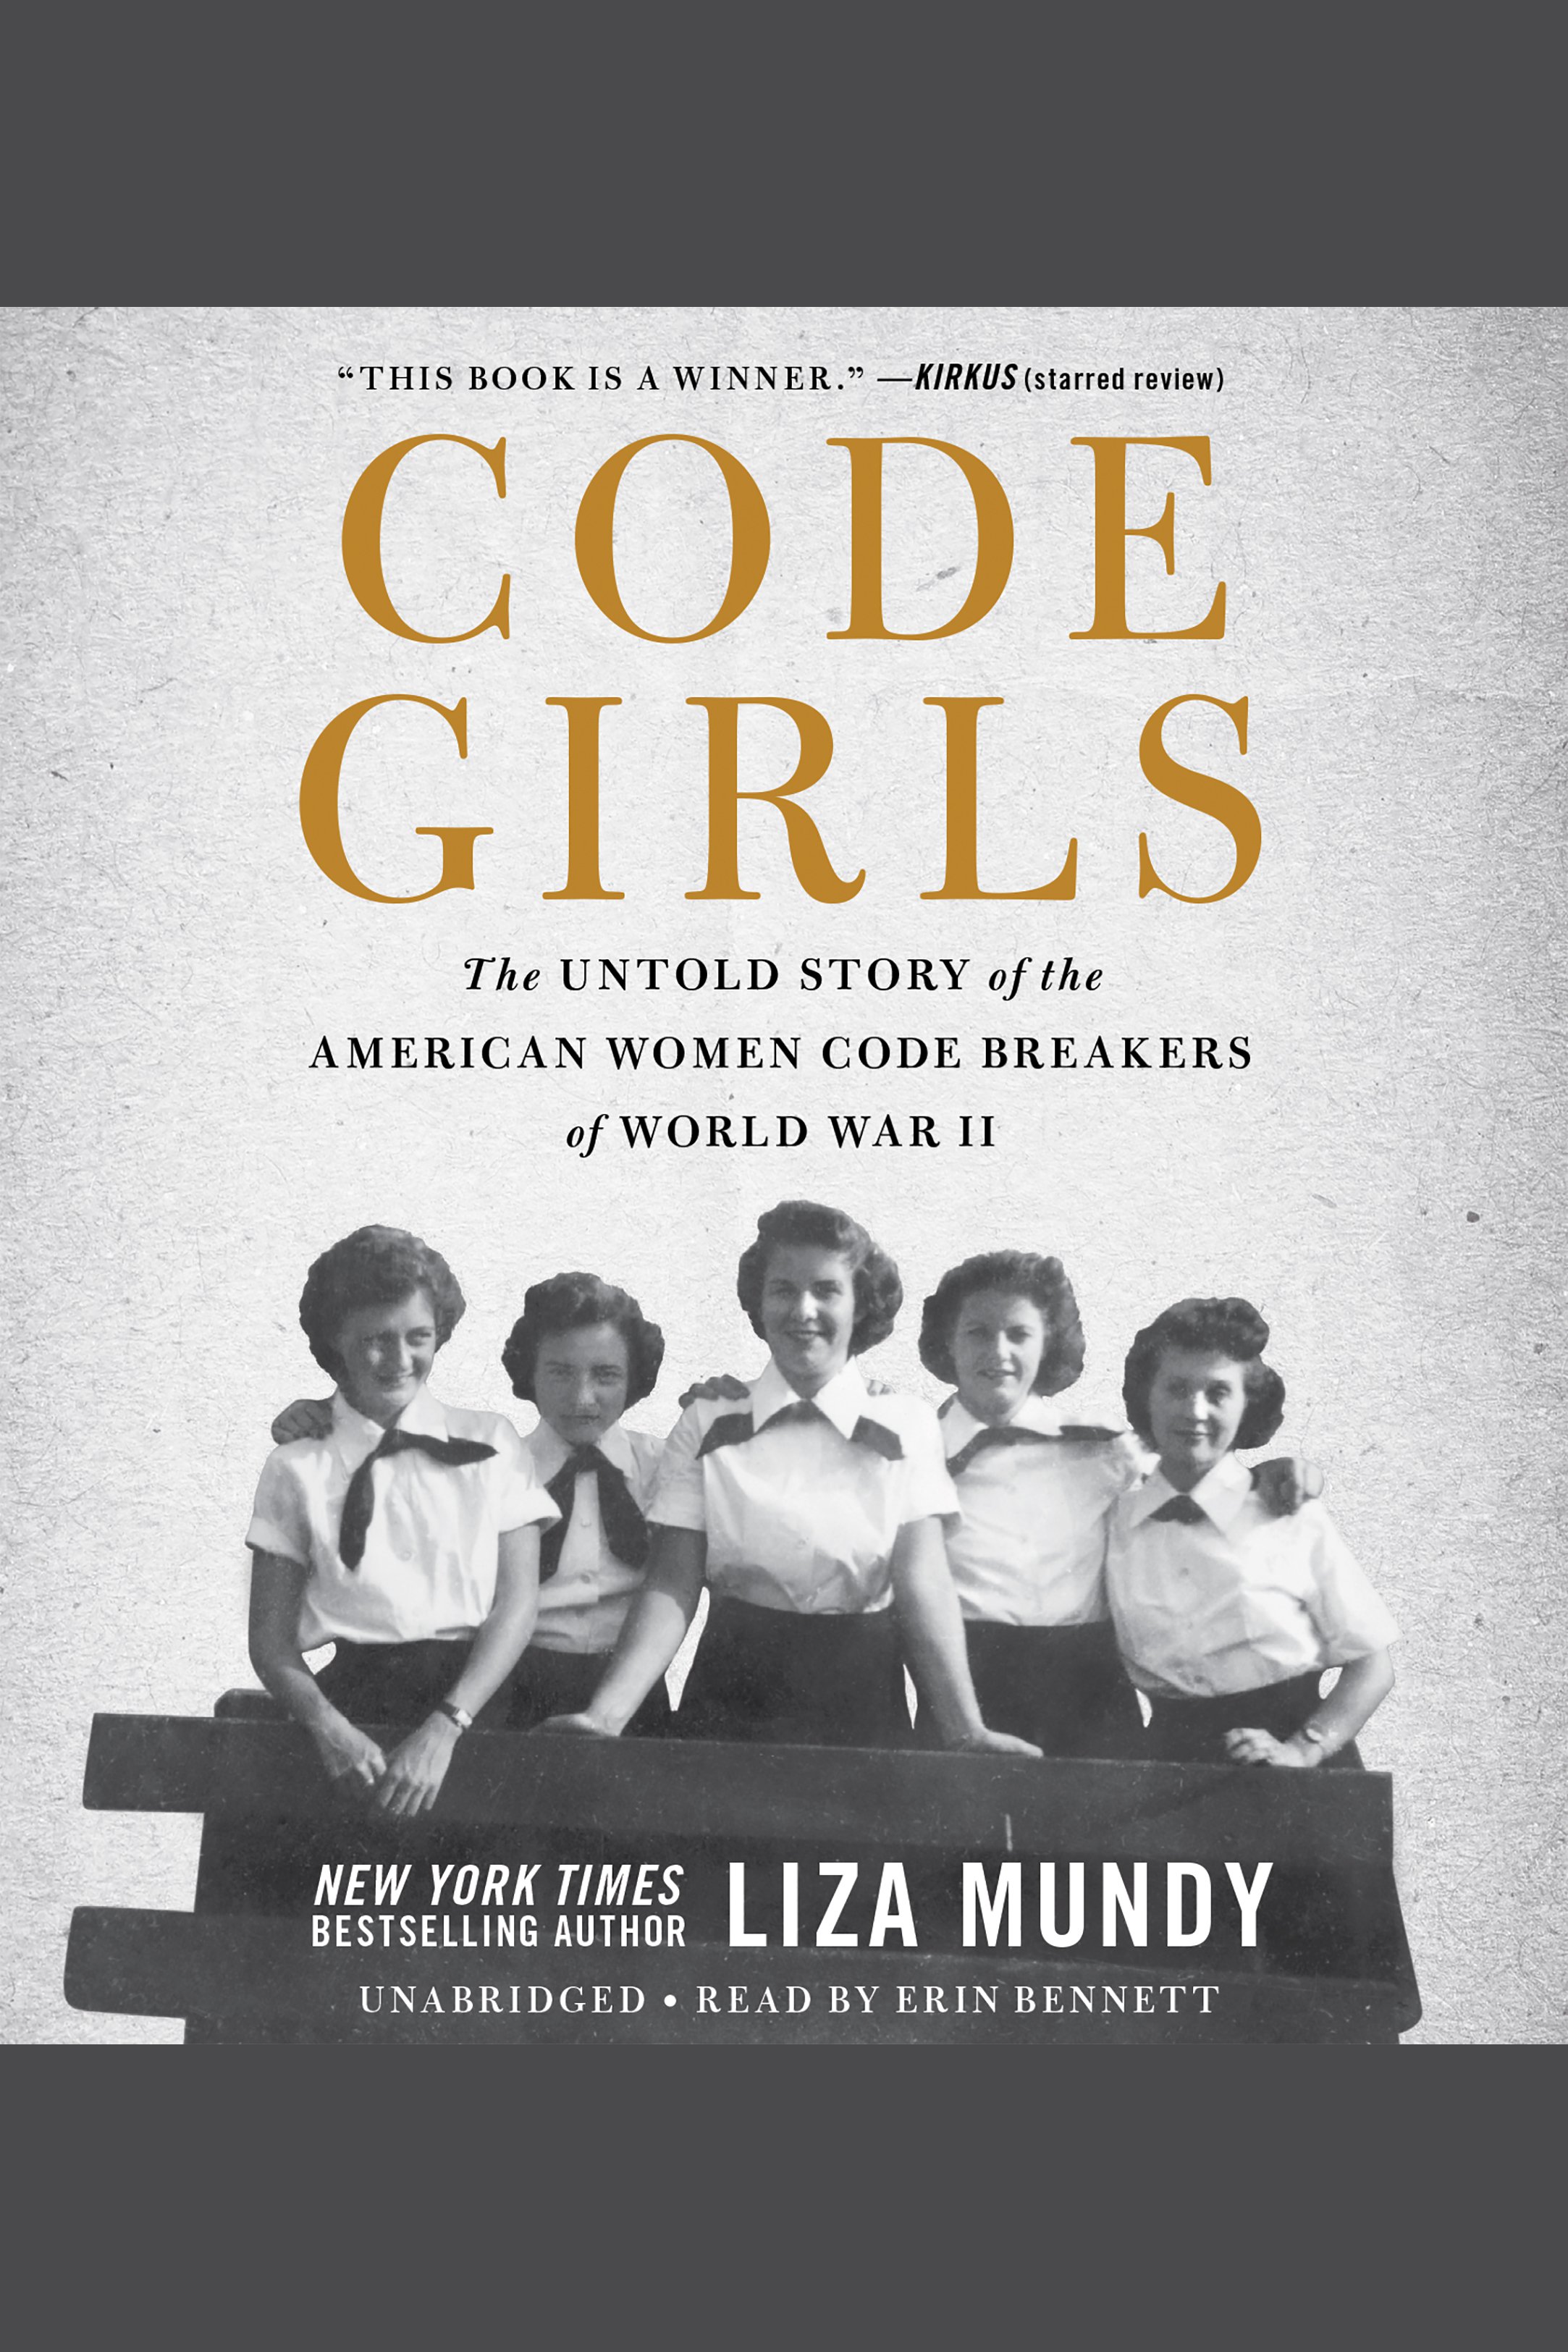 Code girls the untold story of the American women code breakers of World War II cover image